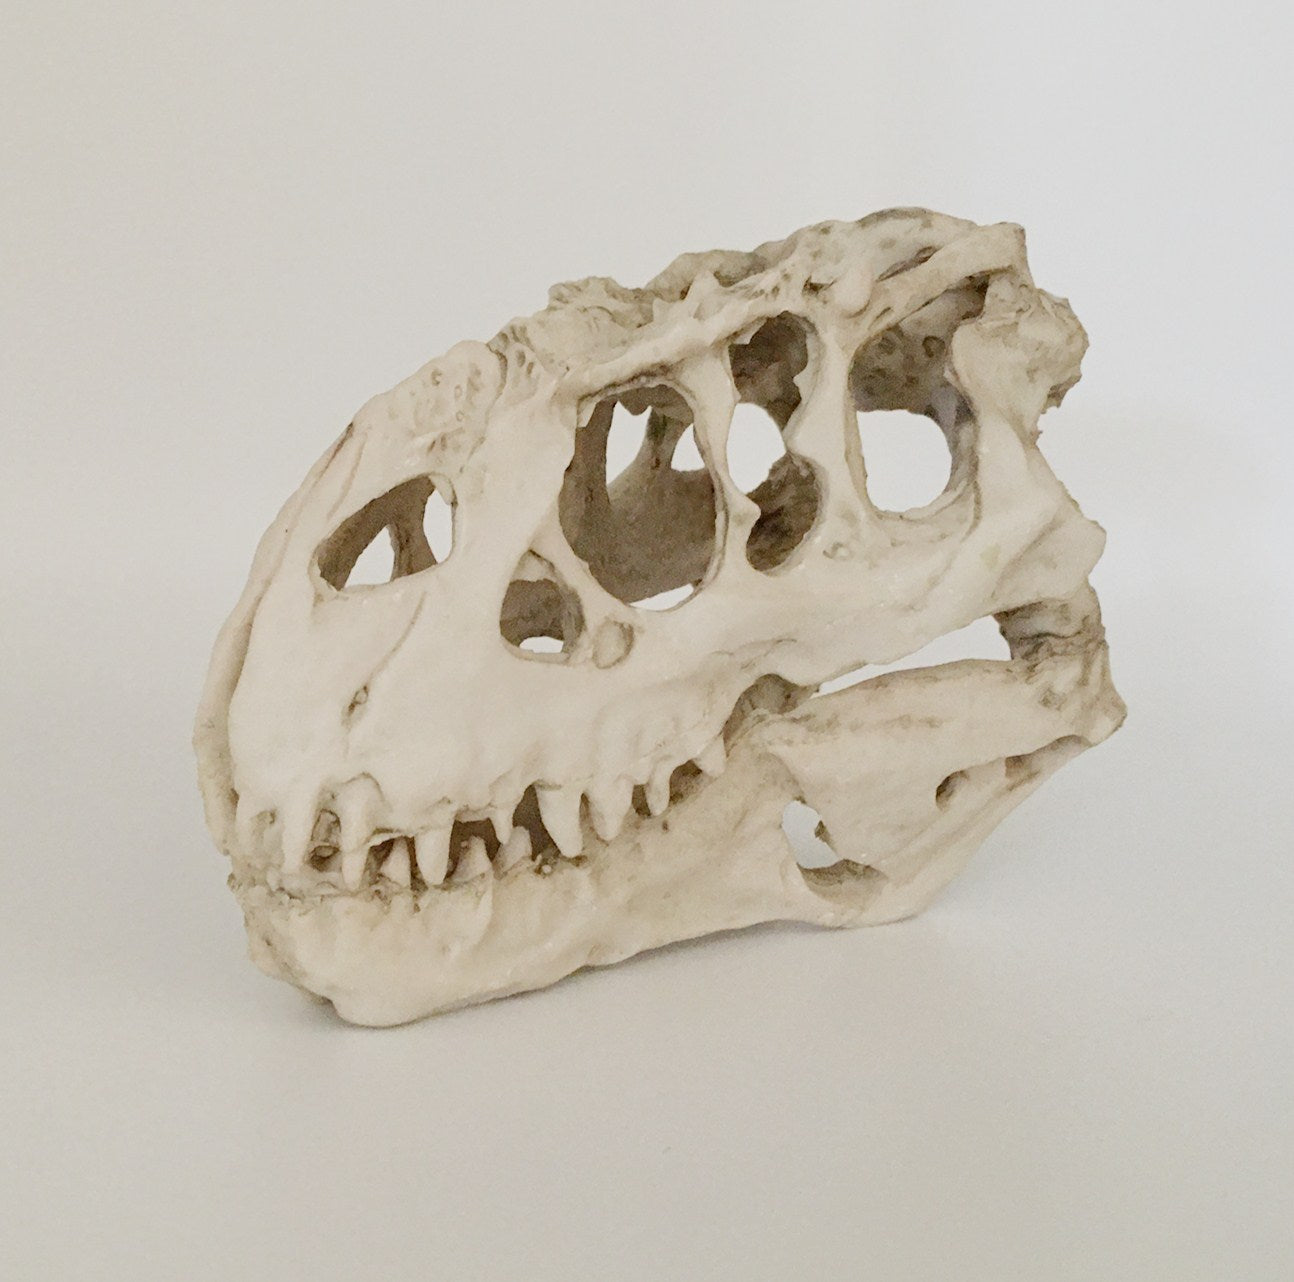 Aquarium Or Reptile House Resin Emulation skull Ornament And Family Daily Decoration